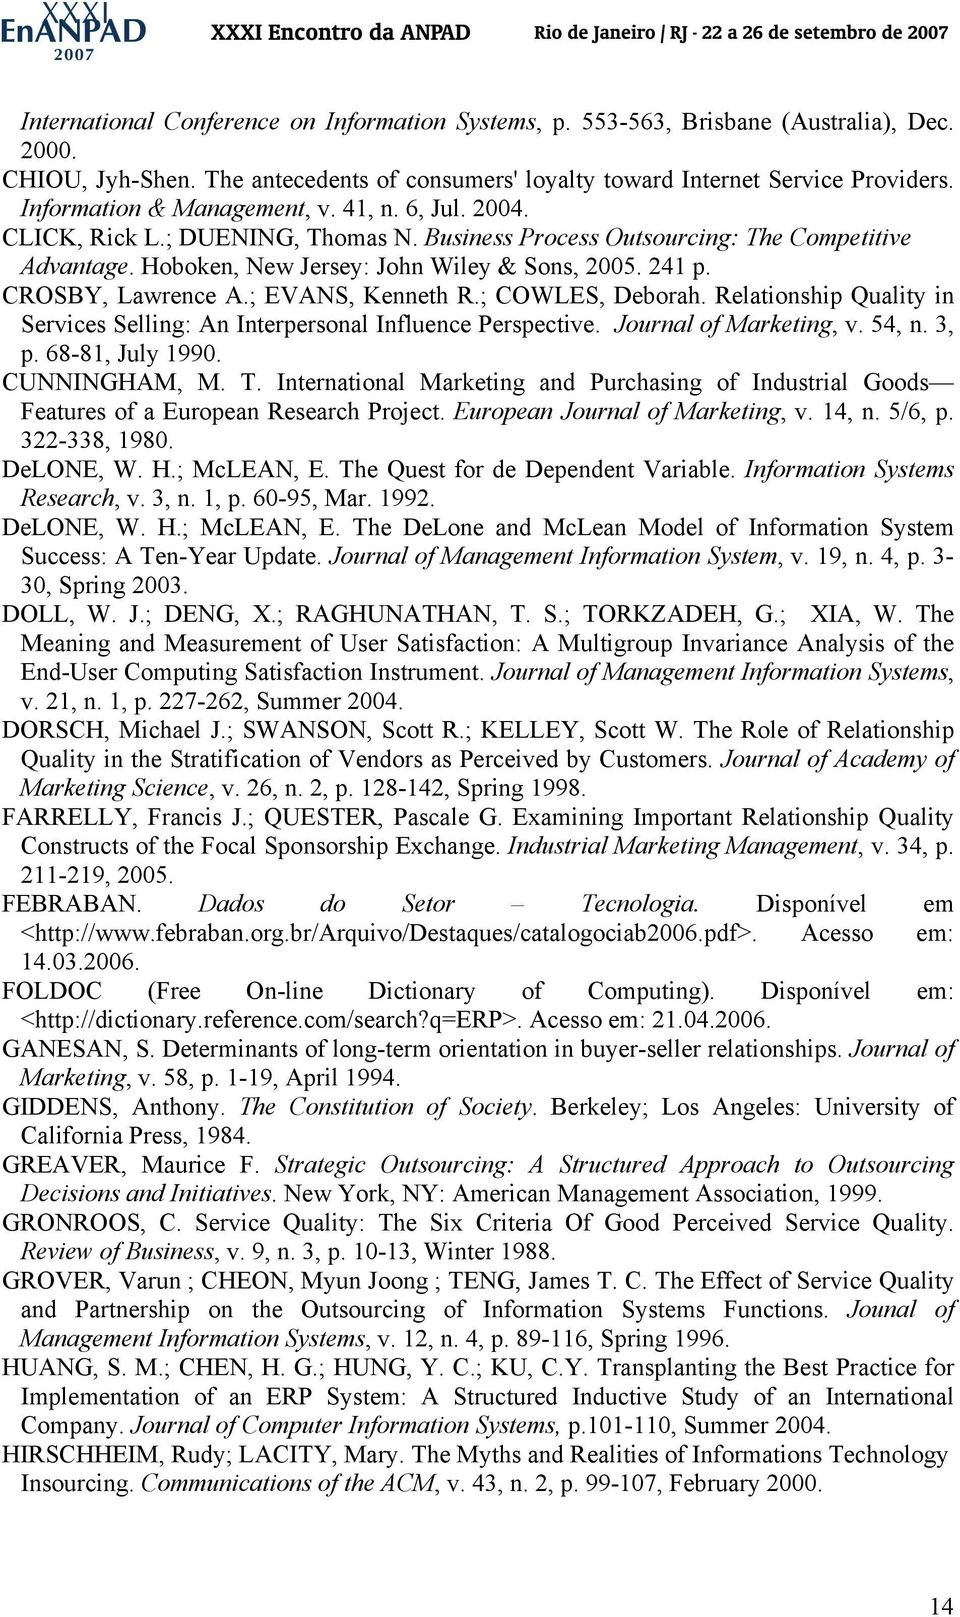 CROSBY, Lawrence A.; EVANS, Kenneth R.; COWLES, Deborah. Relationship Quality in Services Selling: An Interpersonal Influence Perspective. Journal of Marketing, v. 54, n. 3, p. 68-81, July 1990.